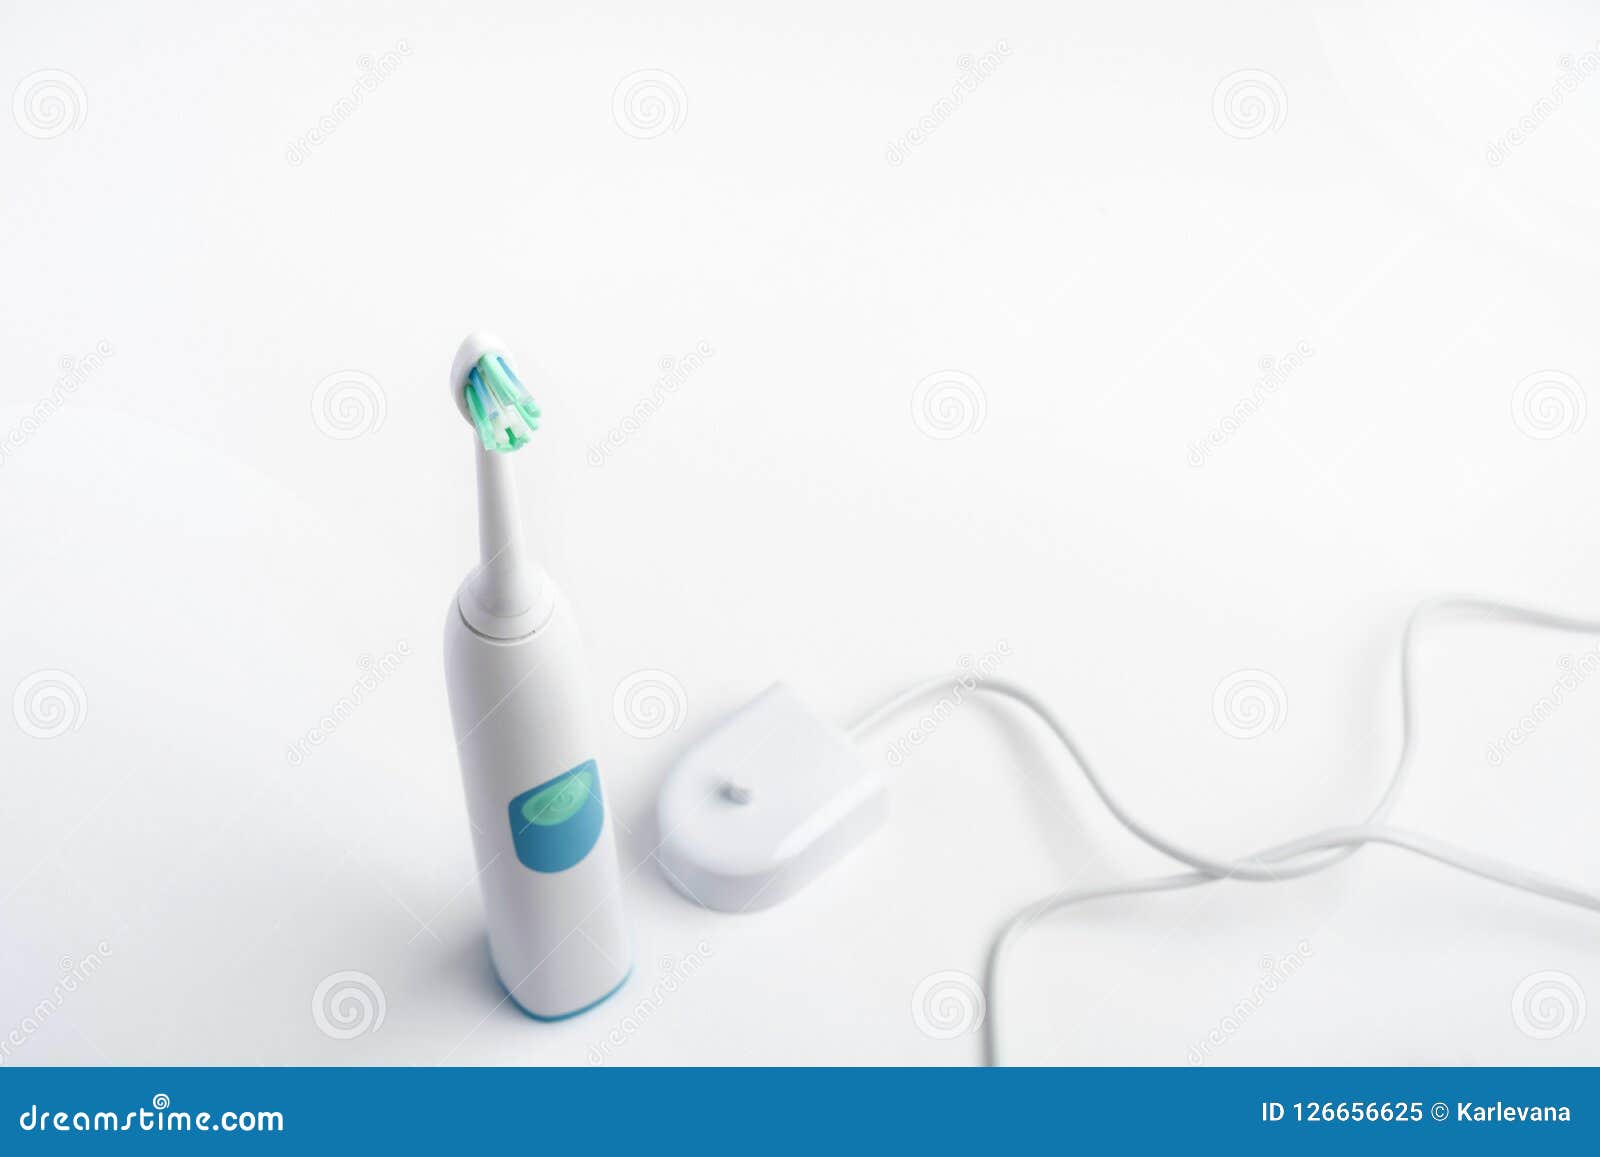 electrical toothbrush with battery charger for higiene of mouth cavity on white background